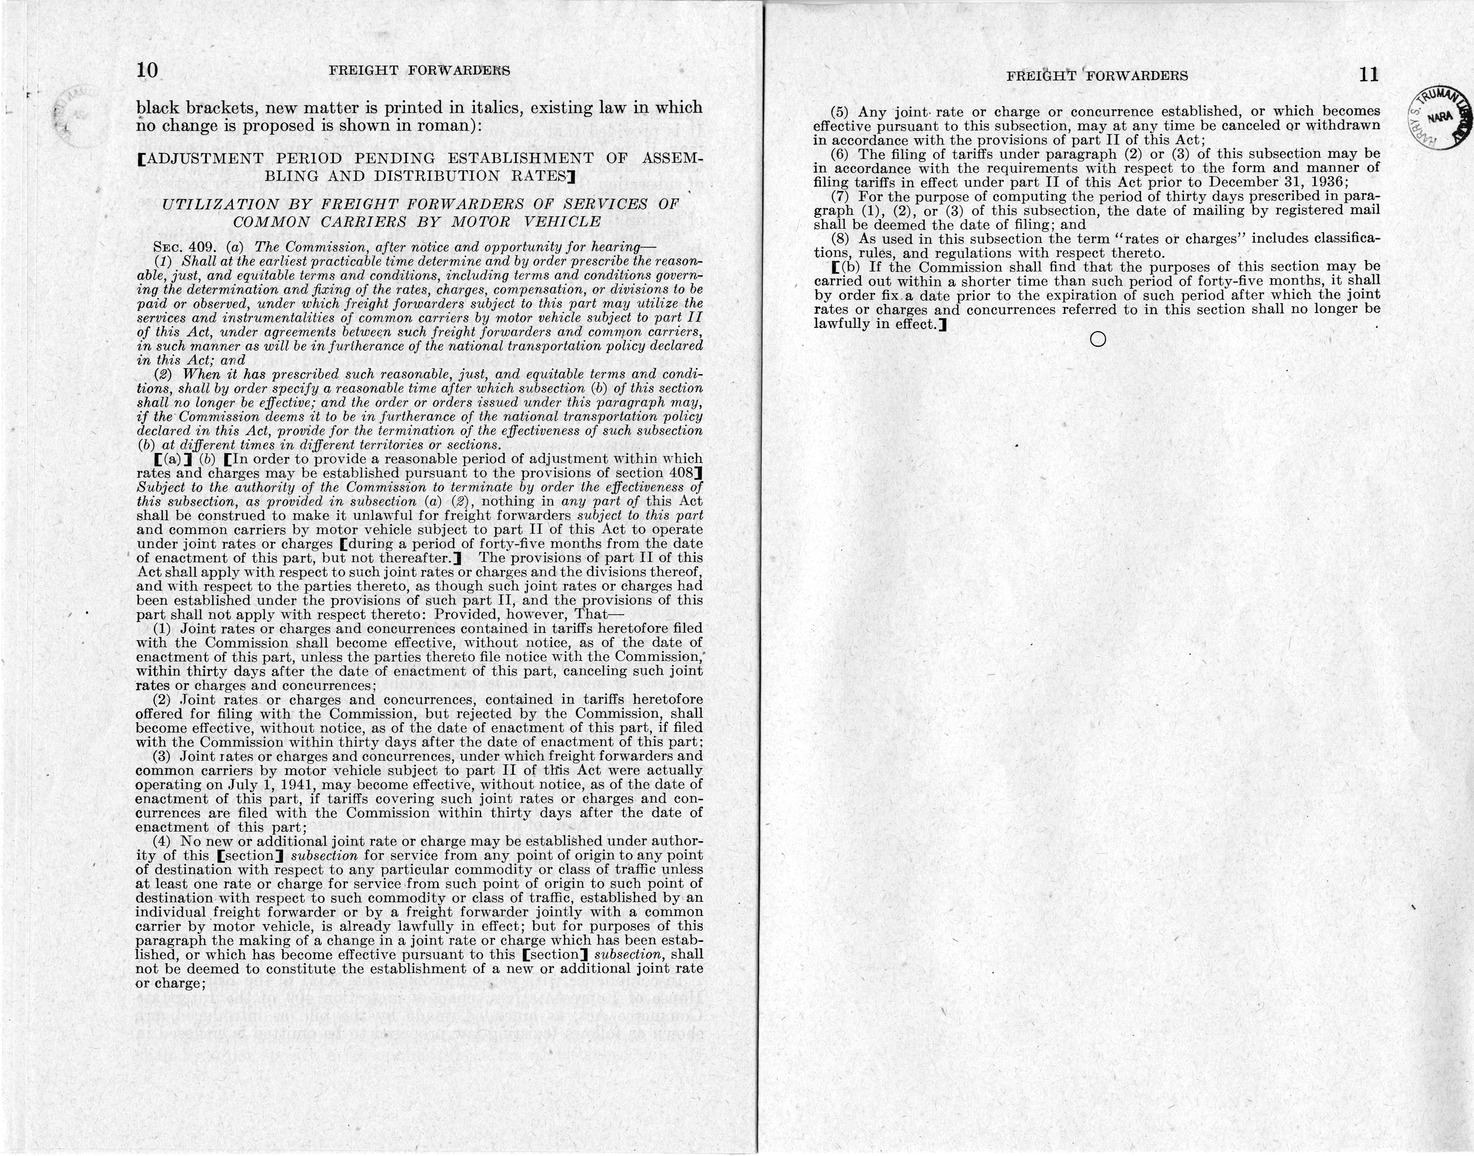 Memorandum from Harold D. Smith to M. C. Latta, H. R. 2764, To Amend Section 409 of the Interstate Commerce Act, With Respect to the Utilization by Freight Forwarders of the Services of Common Carriers by Motor Vehicle, with Attachments